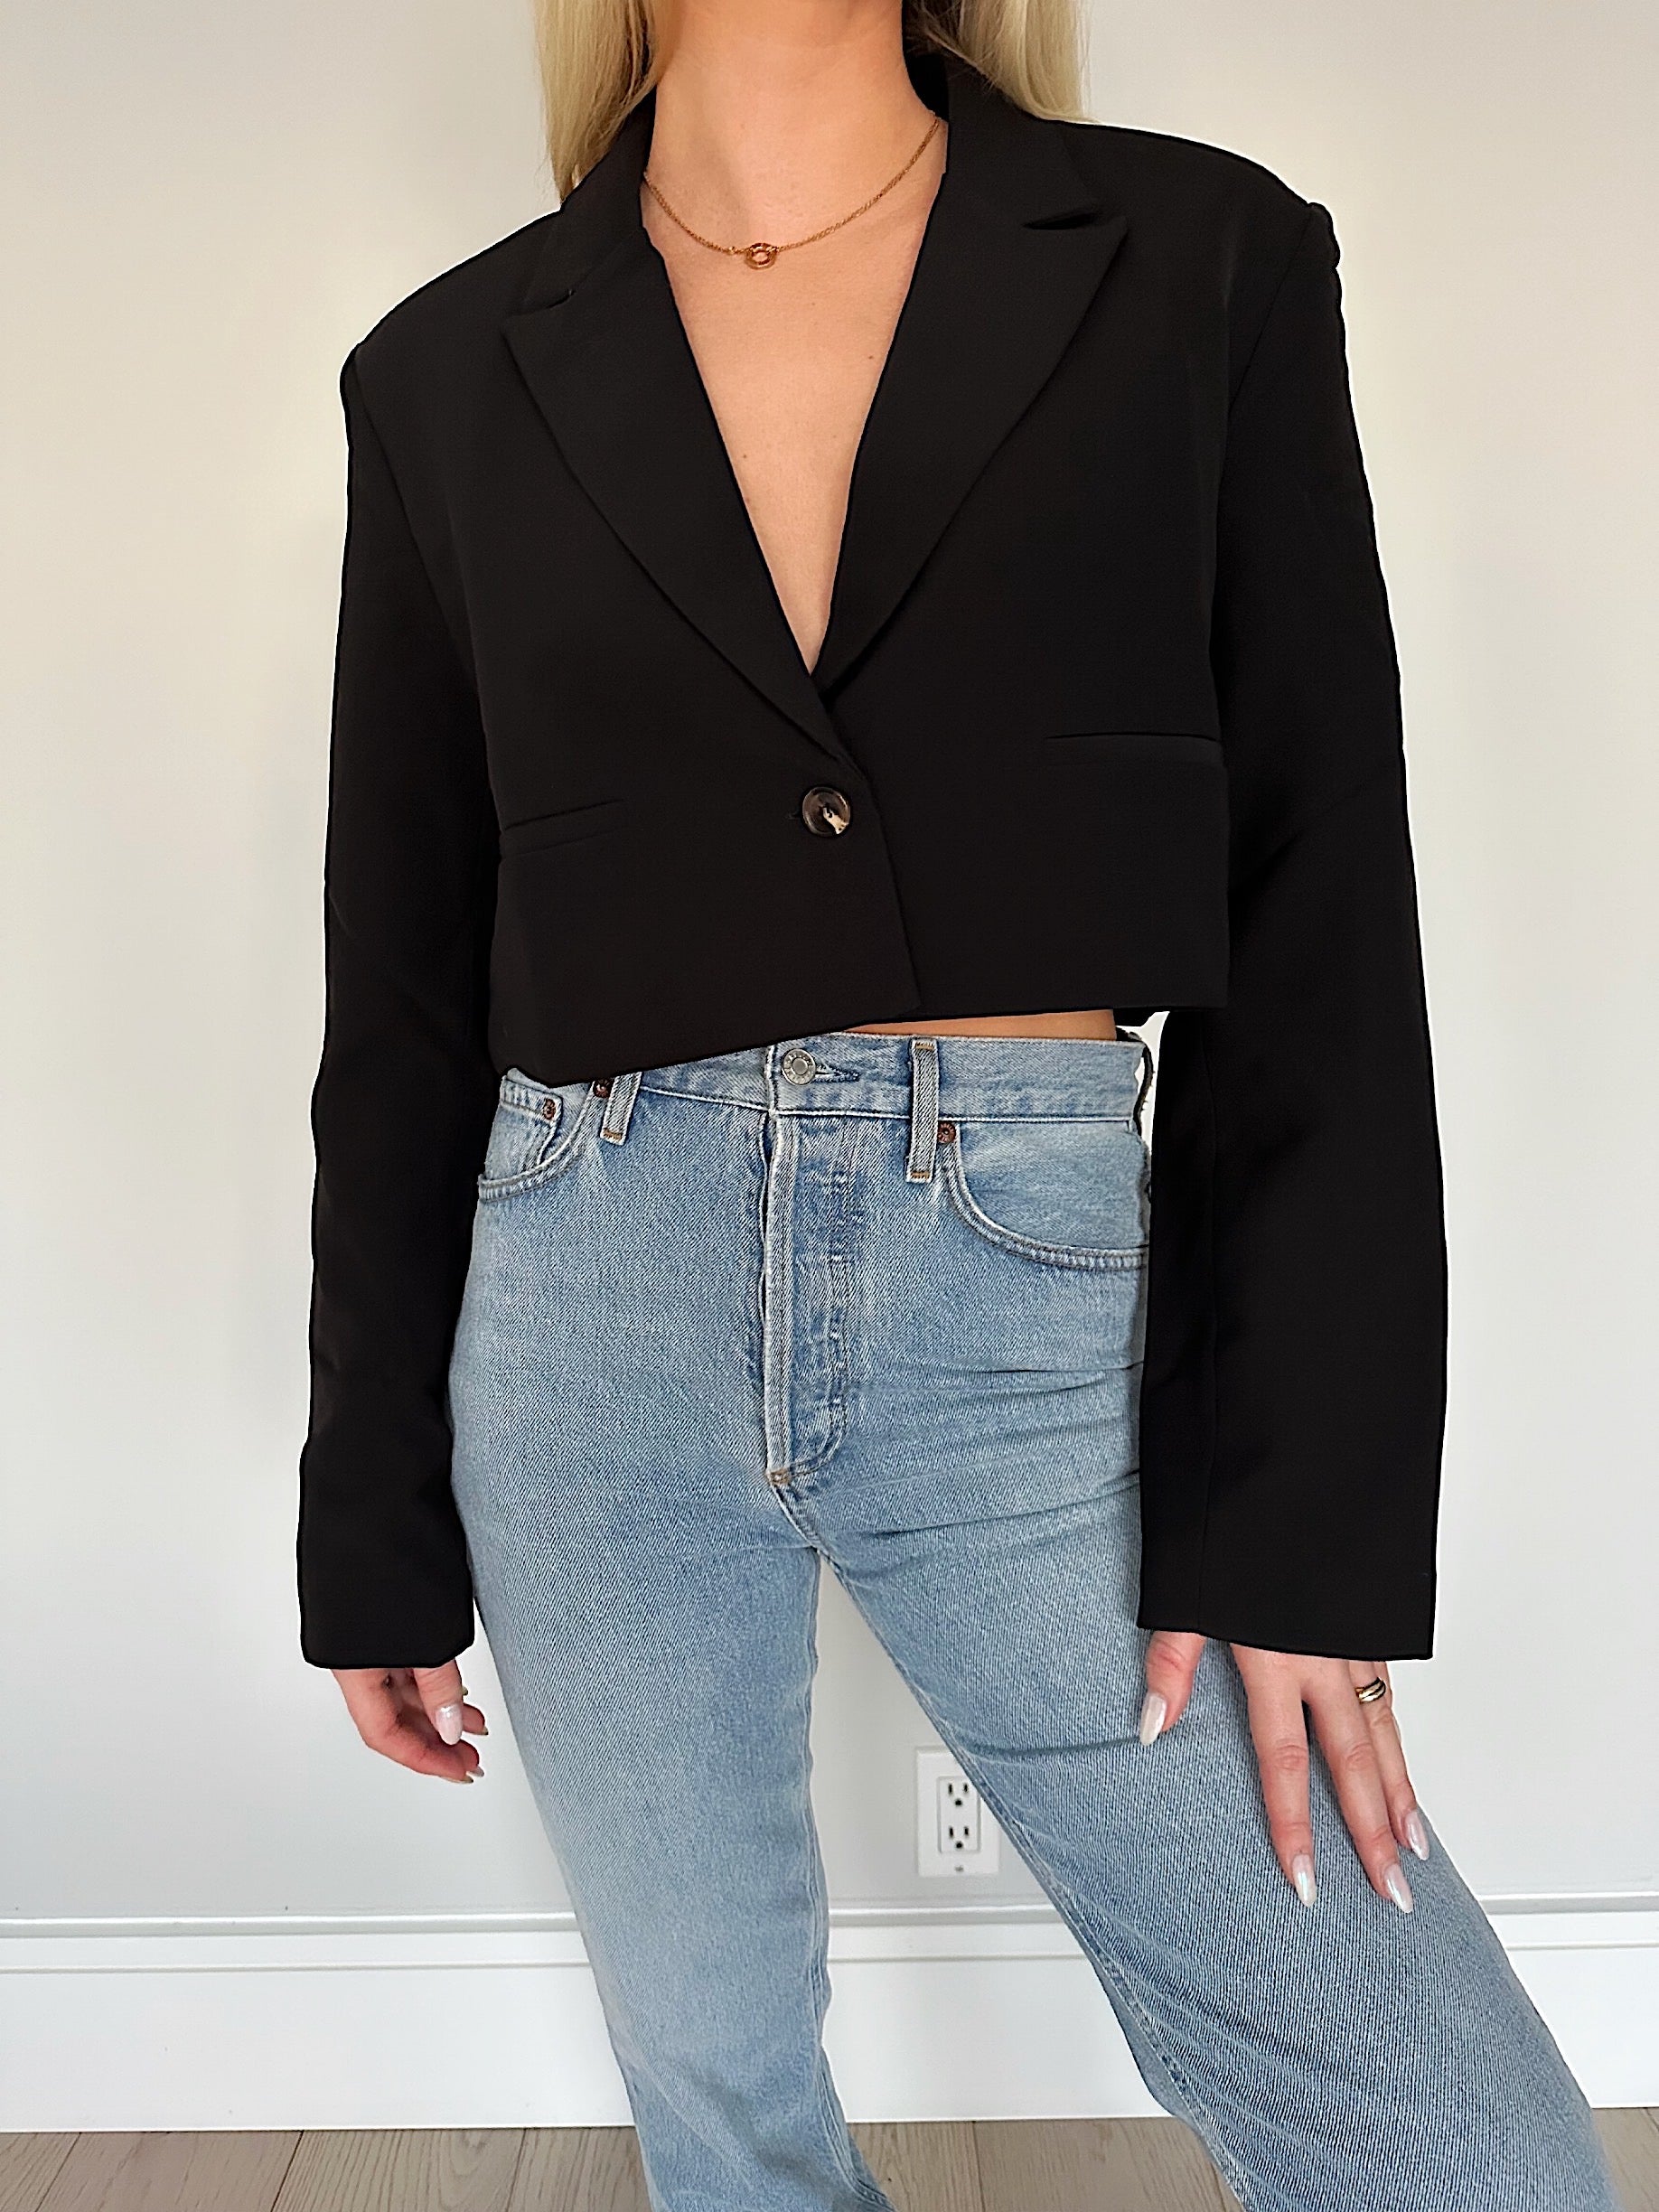 Cropped blazer. Oversized, boxy fit. Single breasted. Collar neckline. Long sleeves. Front button closure. Faux front pockets. Fully lined